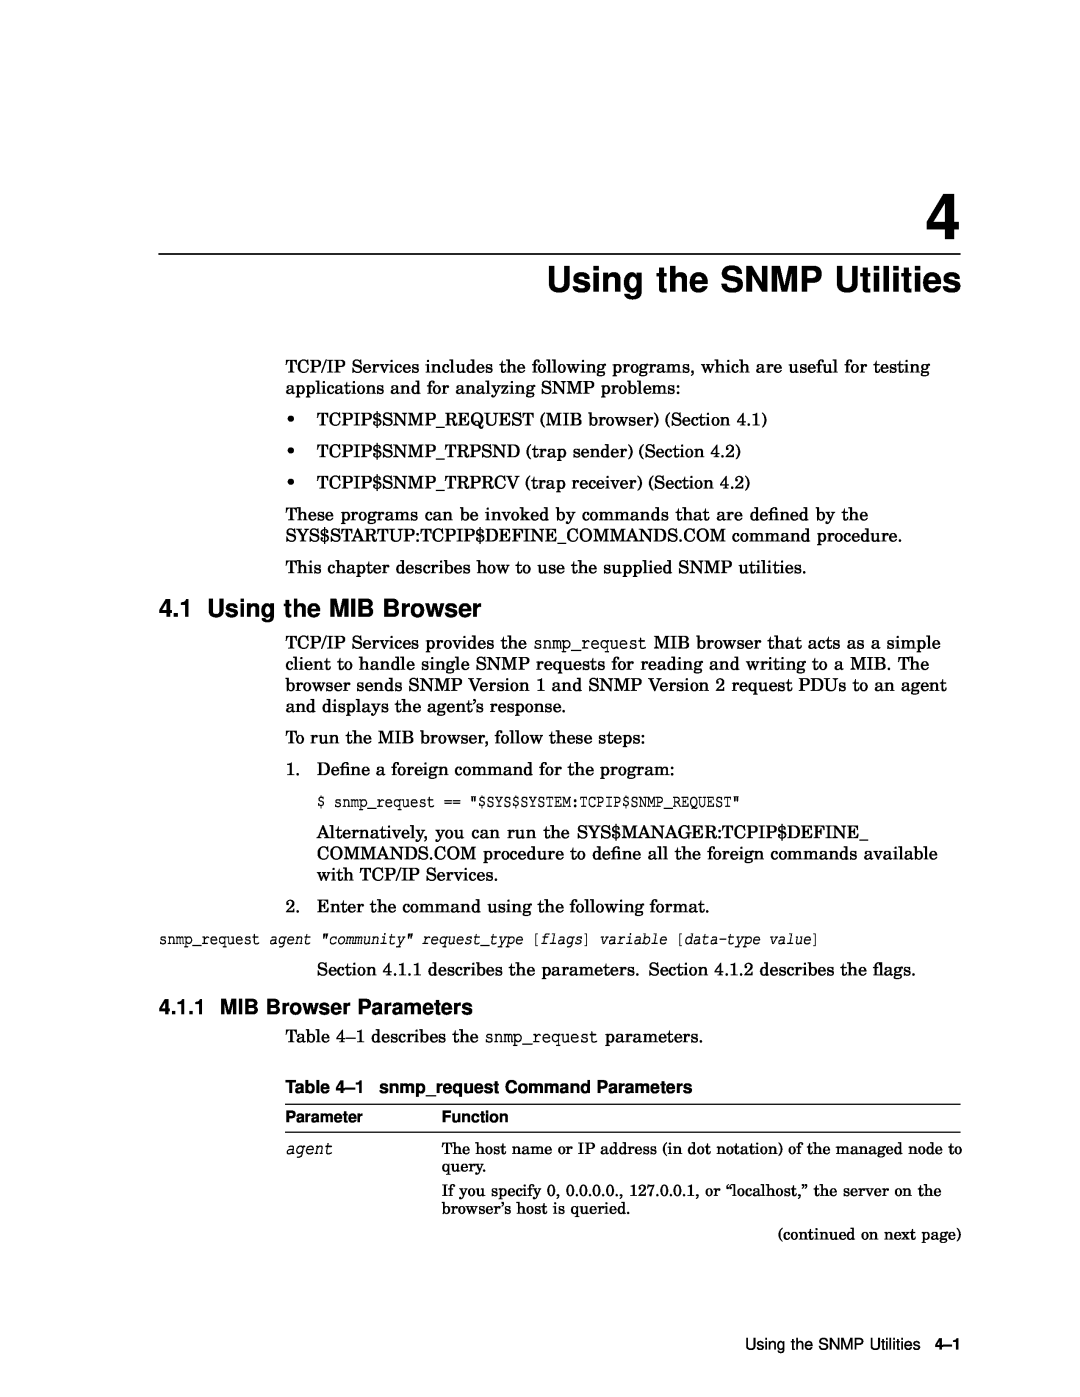 Compaq AAR04BCTE manual Using the SNMP Utilities, Using the MIB Browser, MIB Browser Parameters, agent 